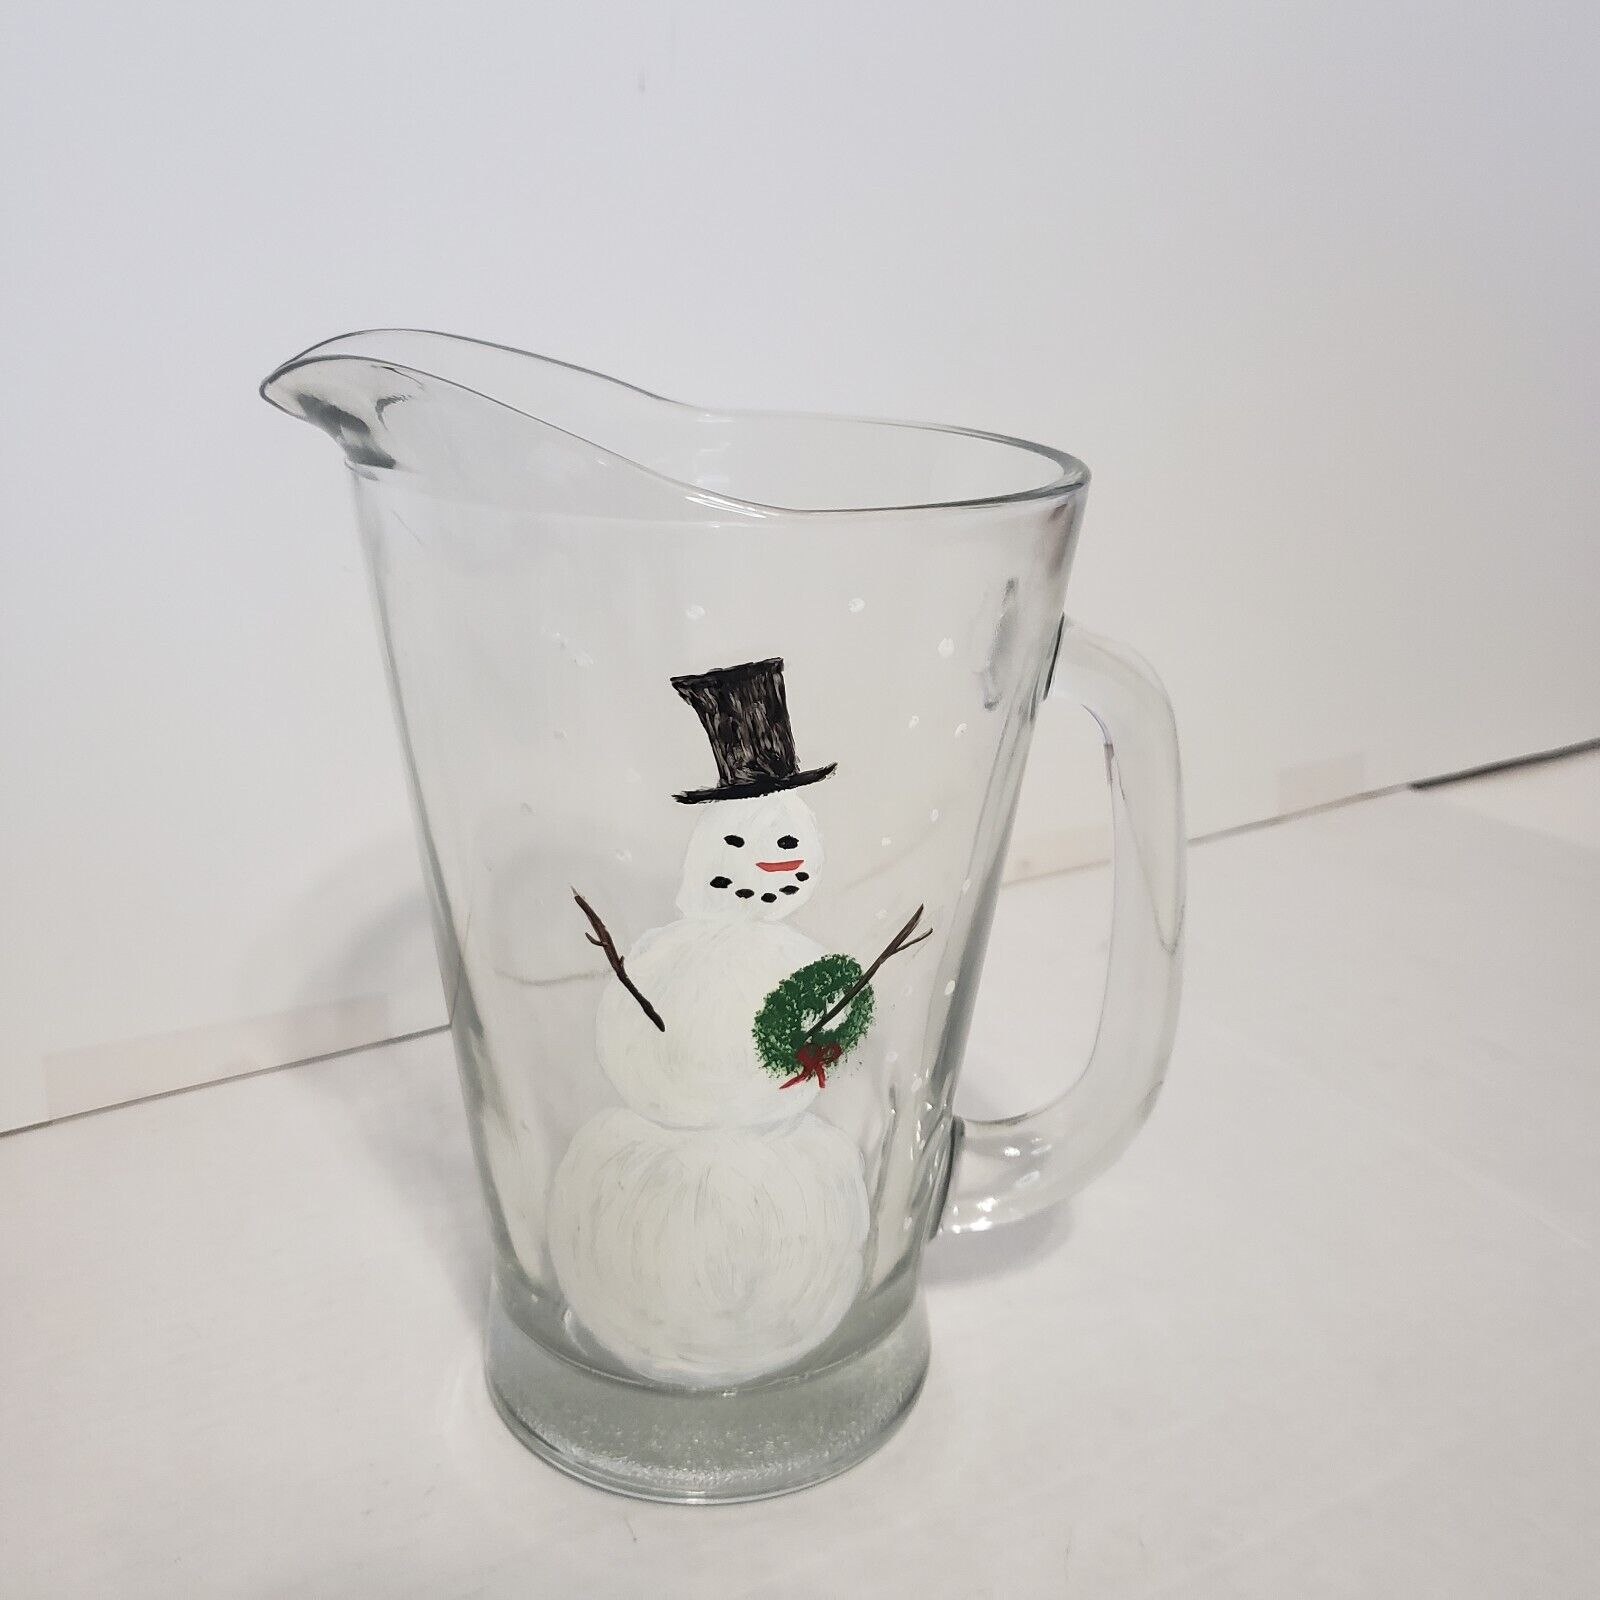 Water Pitcher Hand Painted Snowman Clear Glass Pitcher 52 Ounces 8 Inches